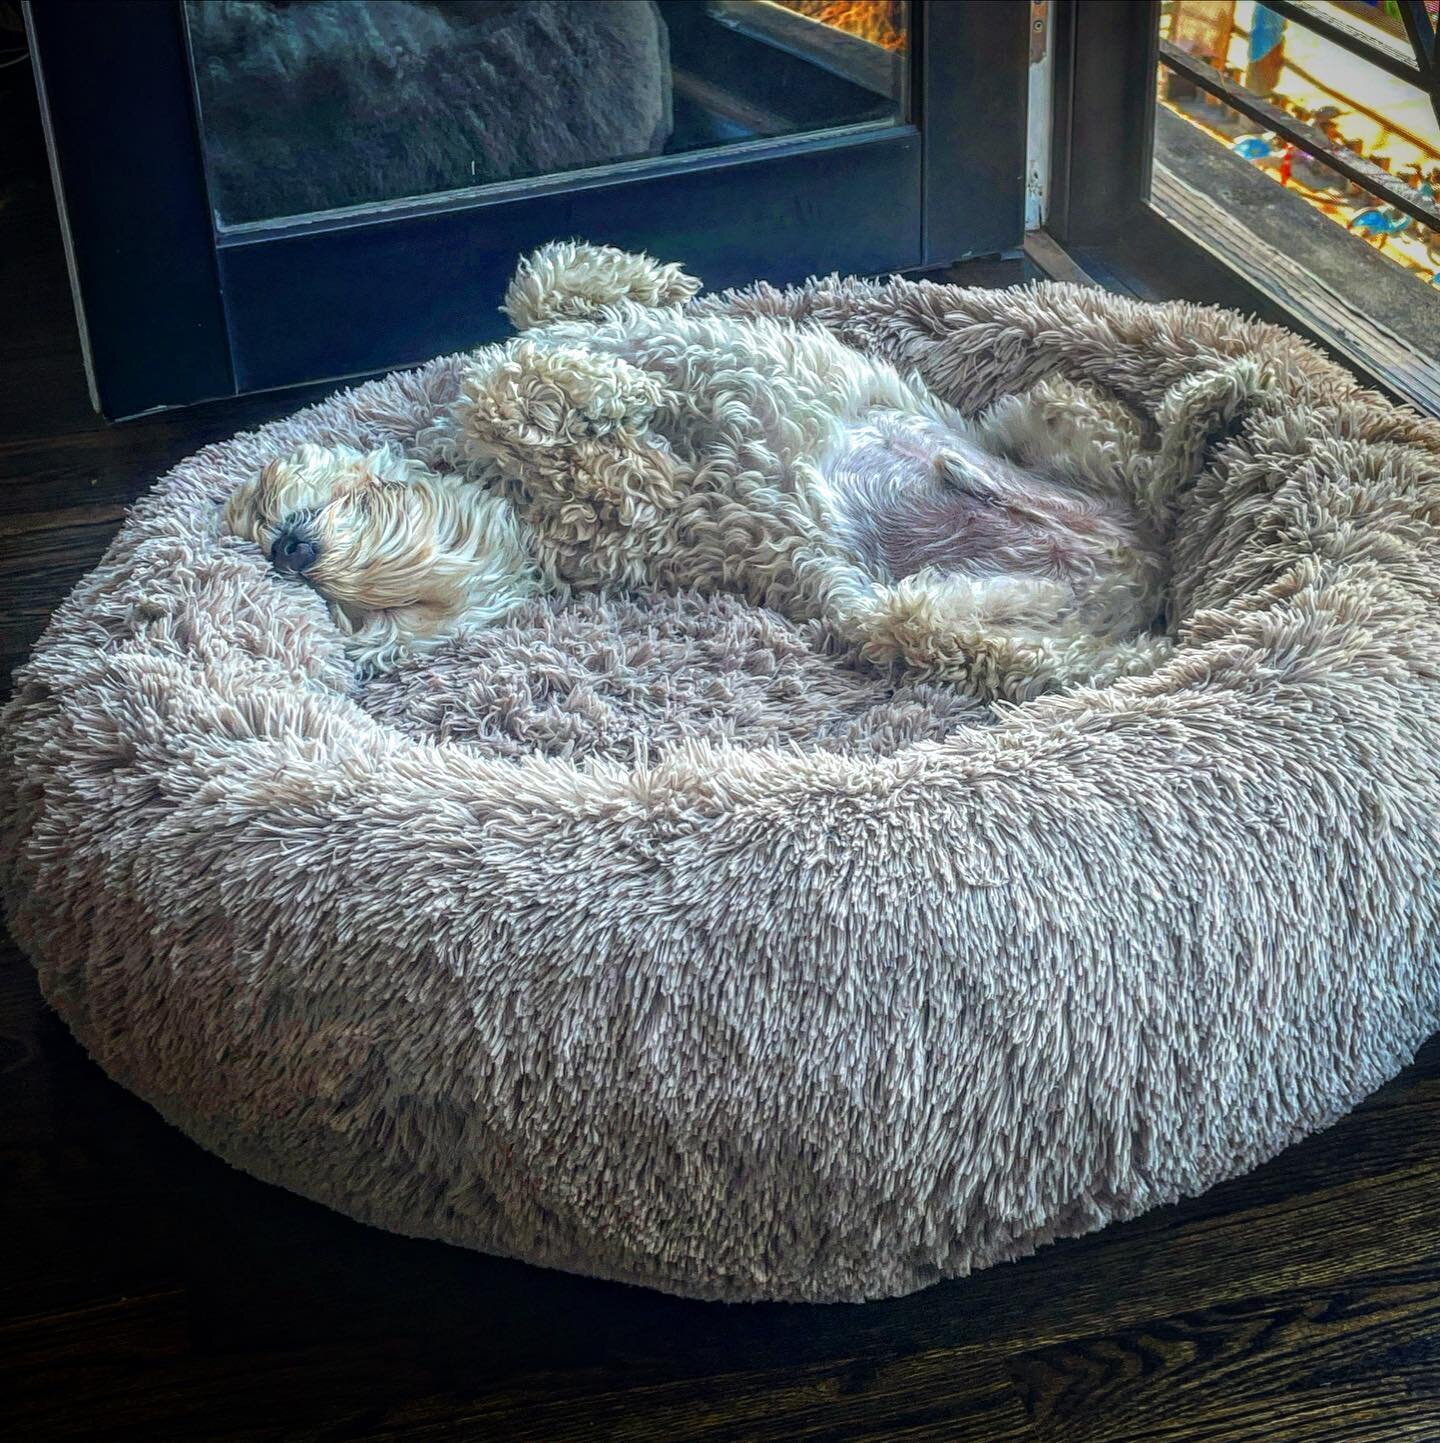 Doggy Danish! Woody loves his new bed.